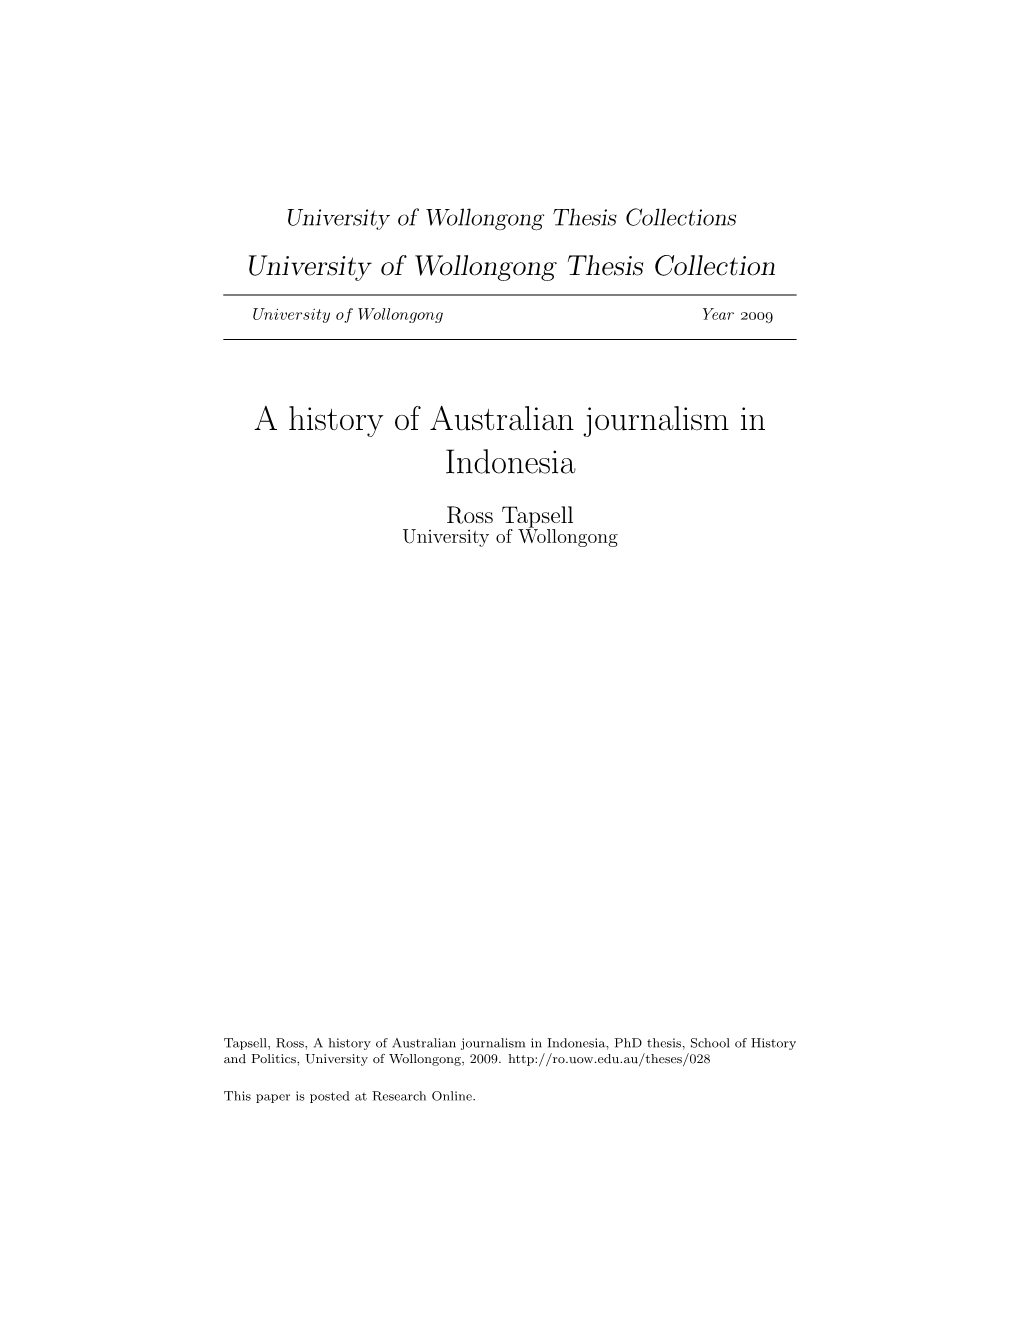 A History of Australian Journalism in Indonesia Ross Tapsell University of Wollongong